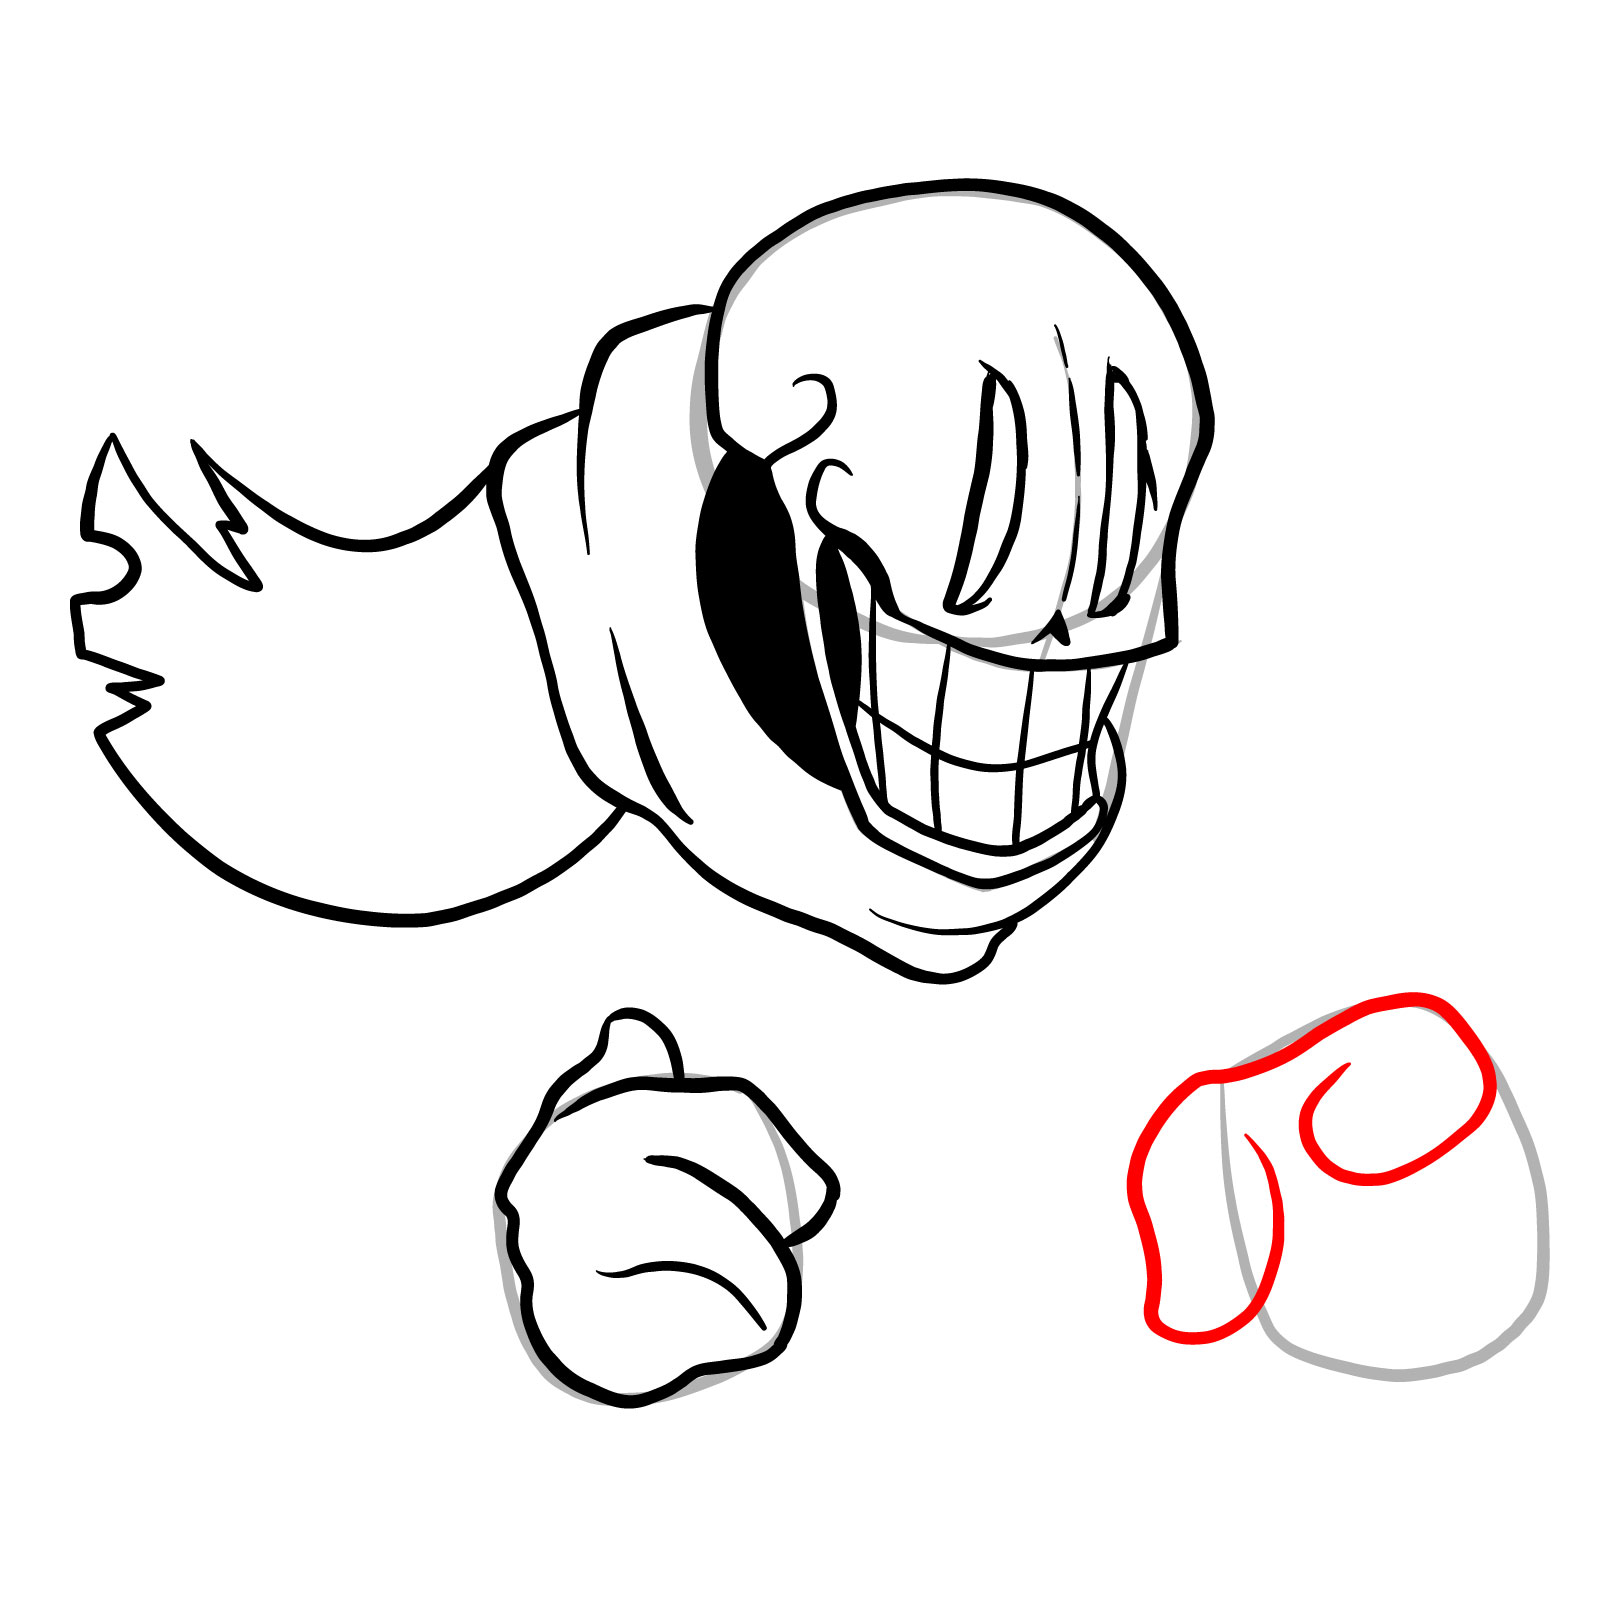 How to draw Phantom!Papyrus from FNF - step 18